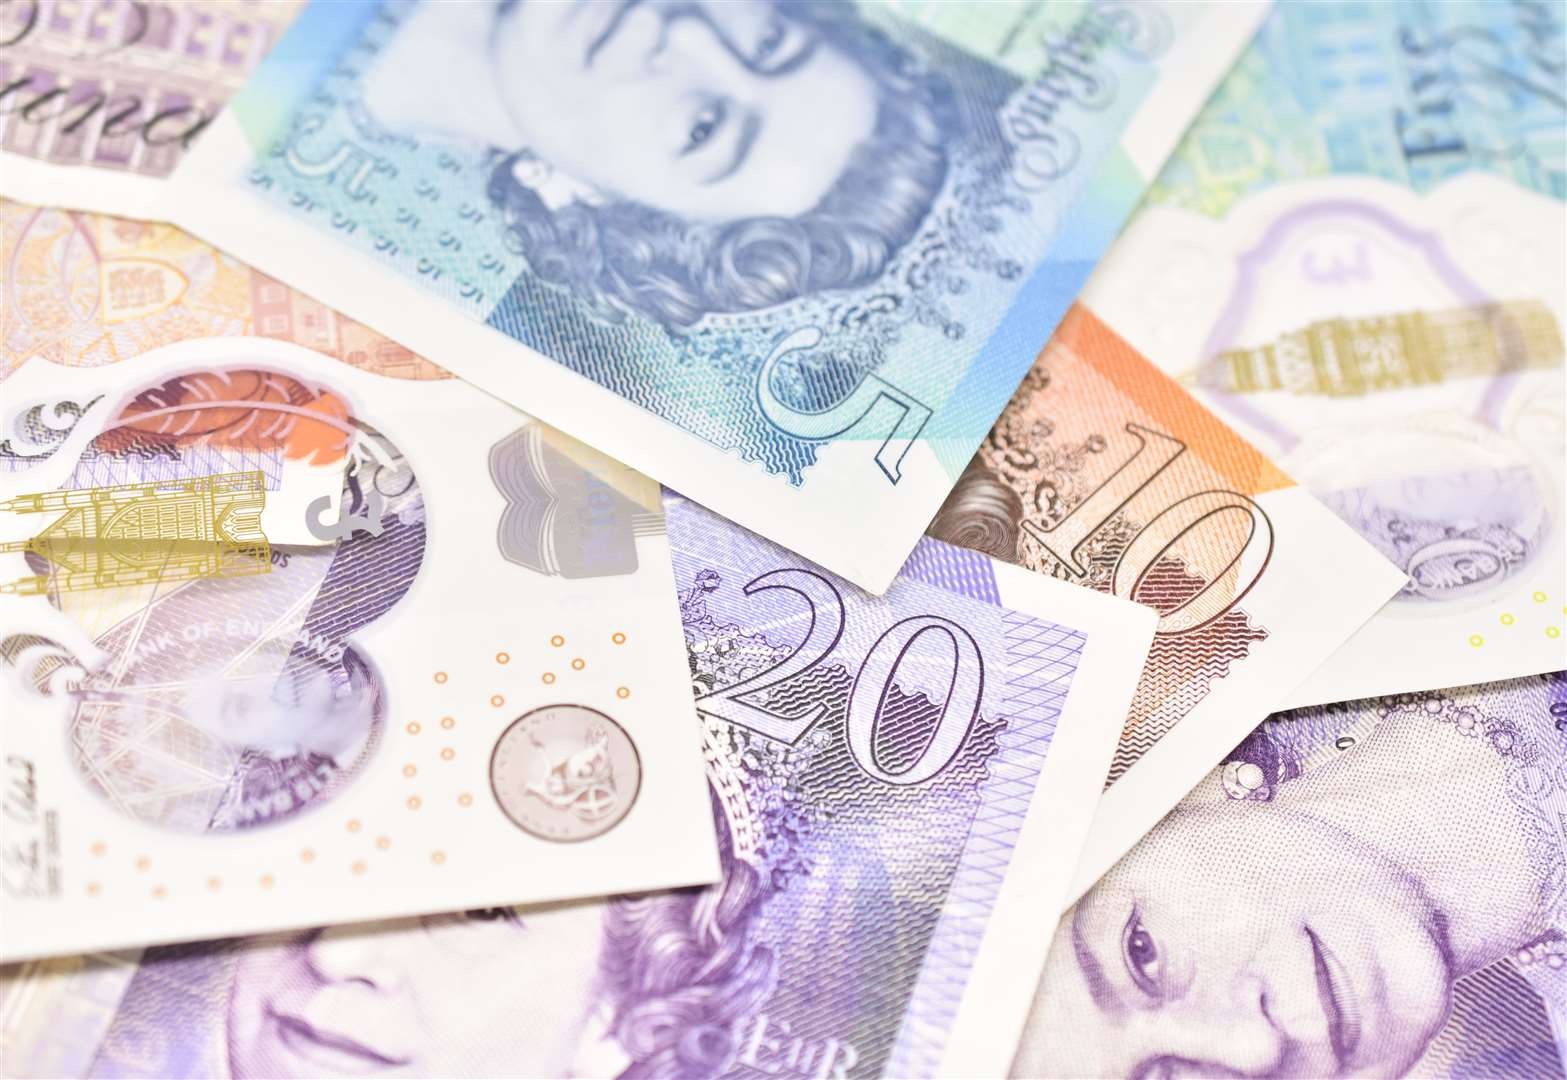 The equivalent in £200,000 in mixed currency was found